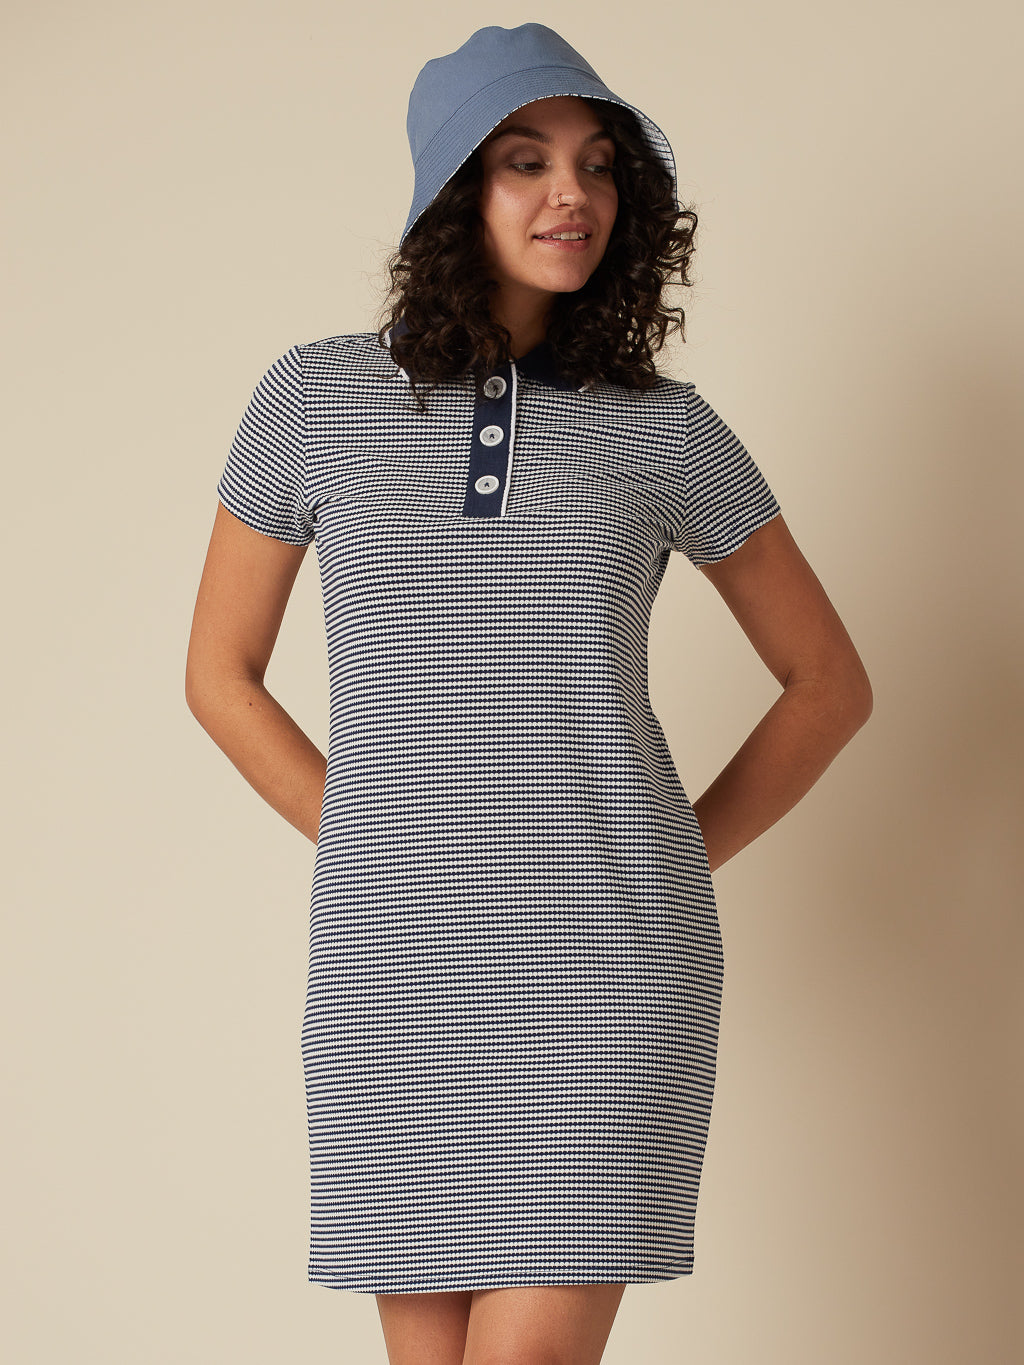 Polo dress with contrasting collar